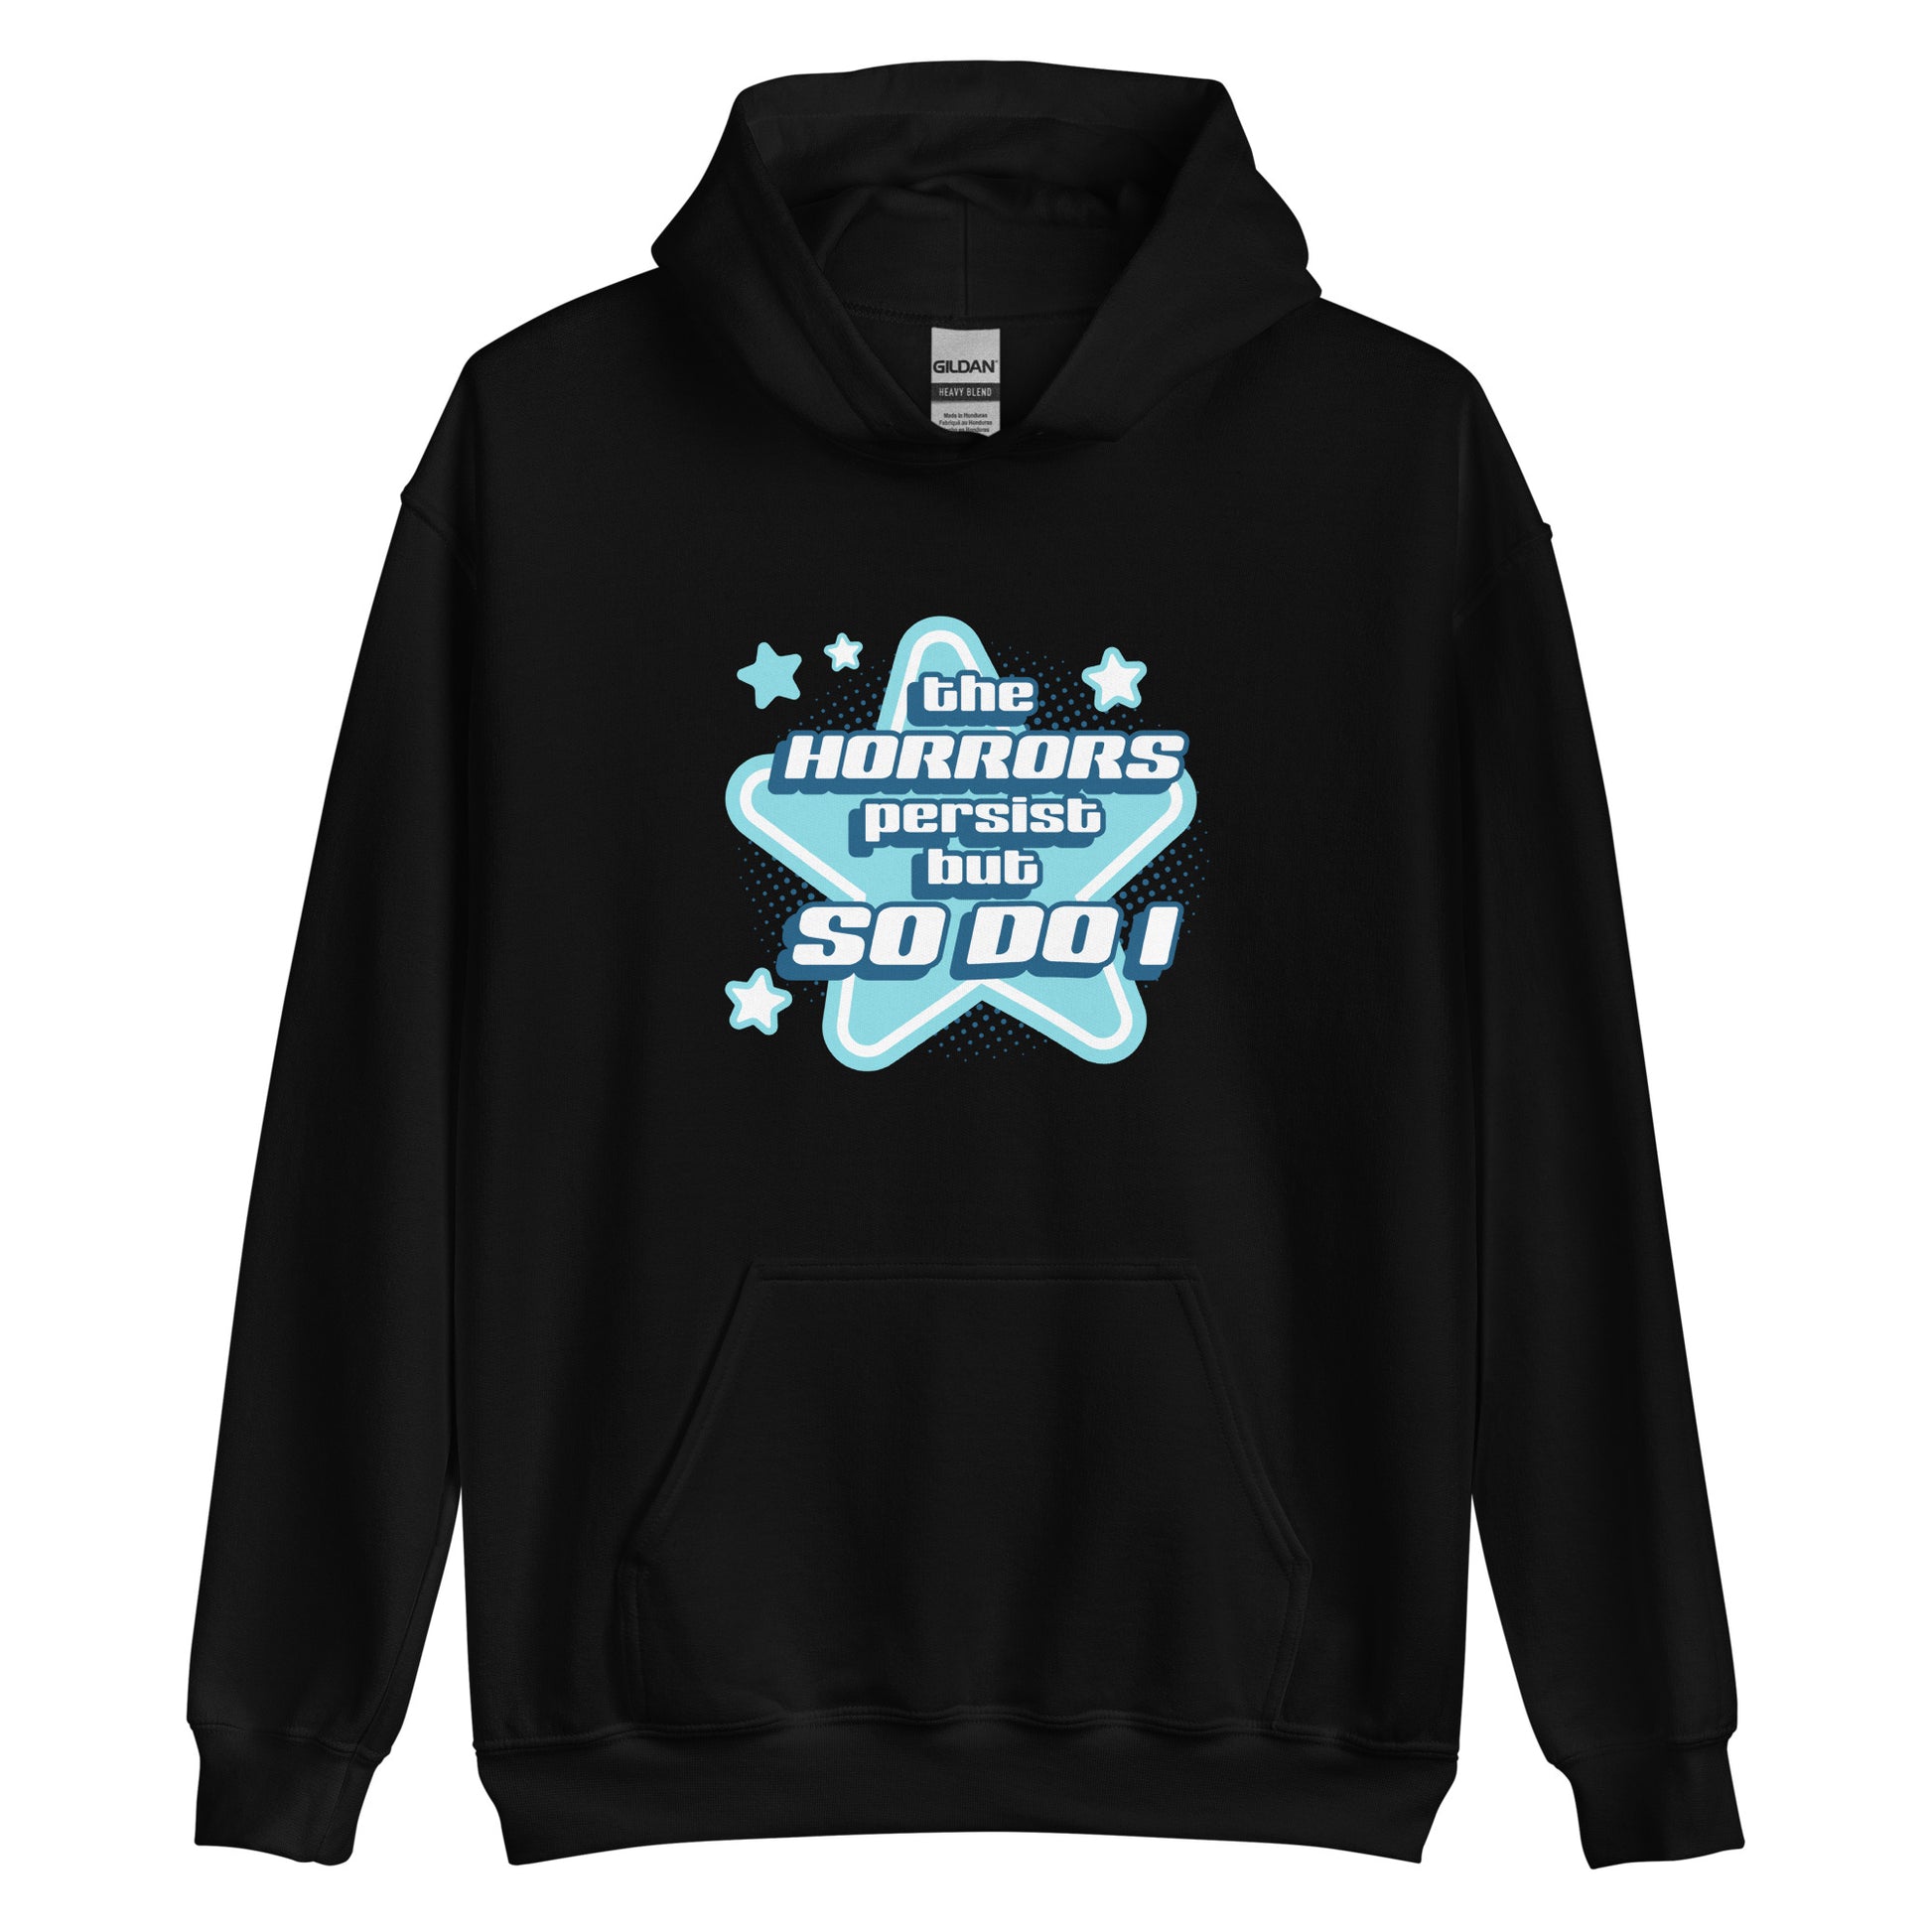 A black hooded sweatshirt featuring blue and white stars over a halftone pattern with chunky text that reads "the horrors persist but so do i".